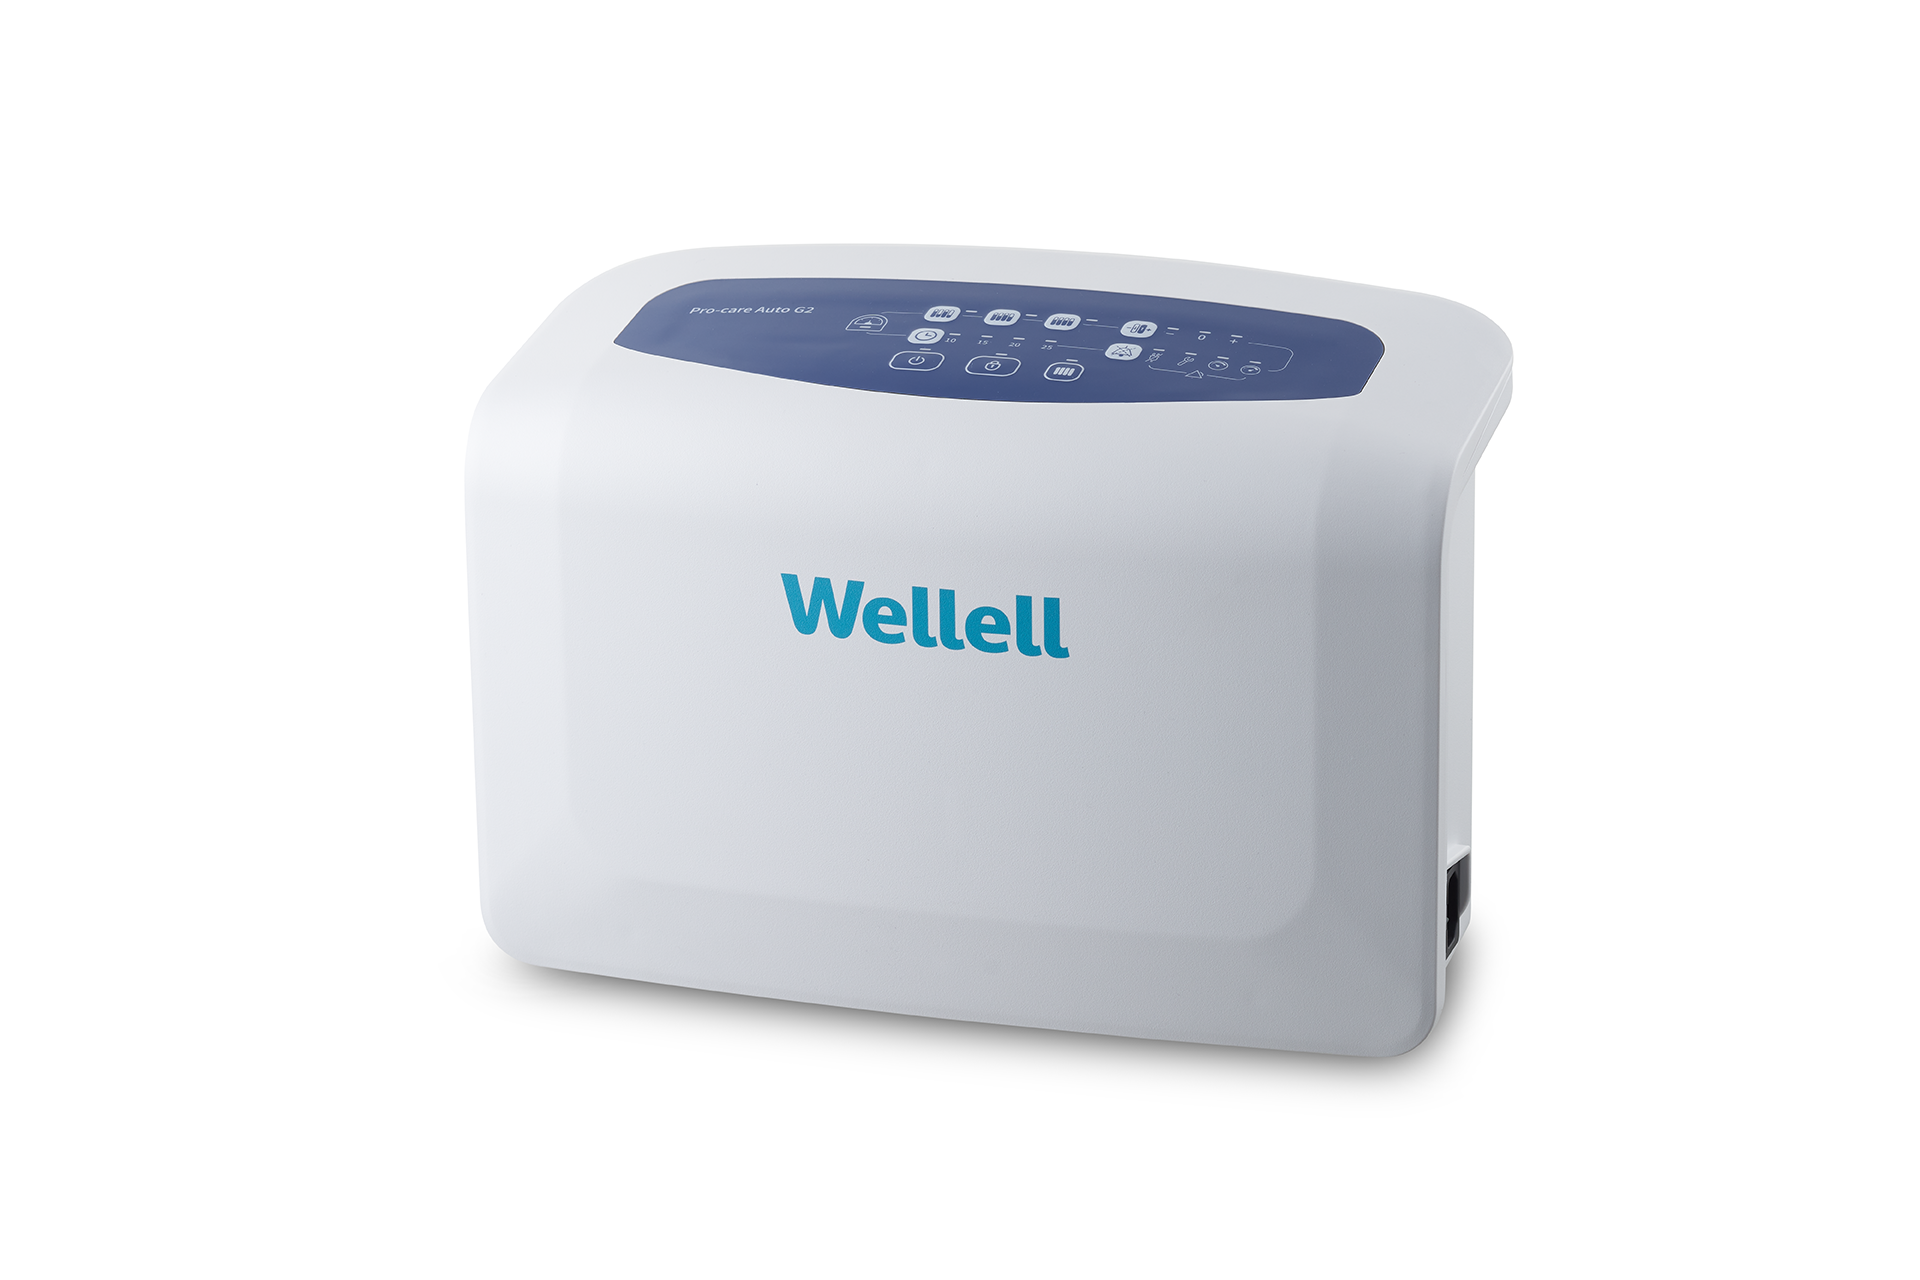 Pro-care Auto - Intuitive pump interface gives easy access to control pressure settings, times, and alarms - ES Wellell